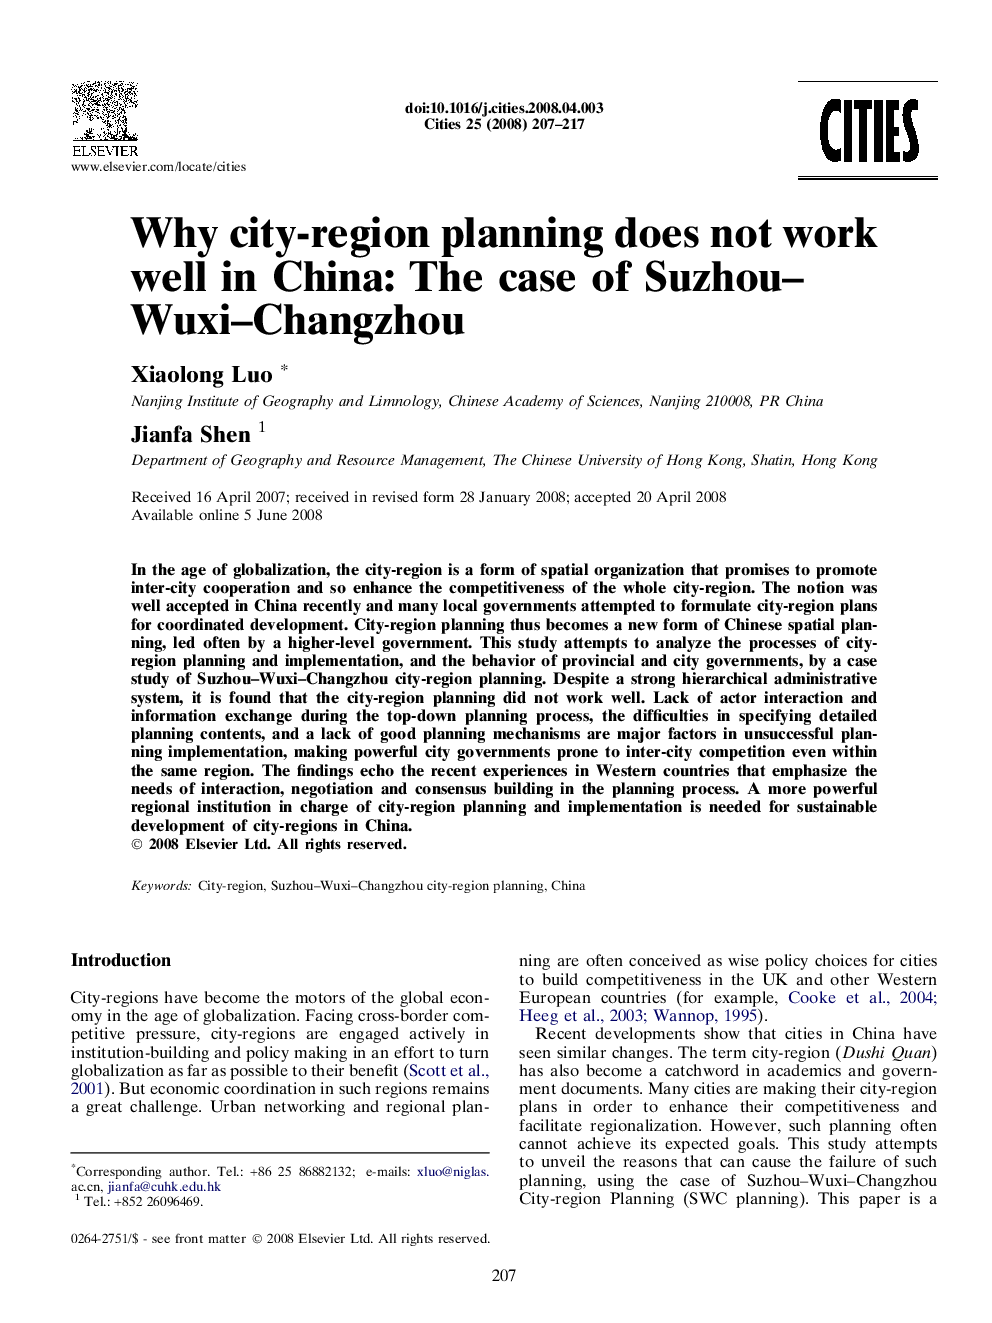 Why city-region planning does not work well in China: The case of Suzhou–Wuxi–Changzhou